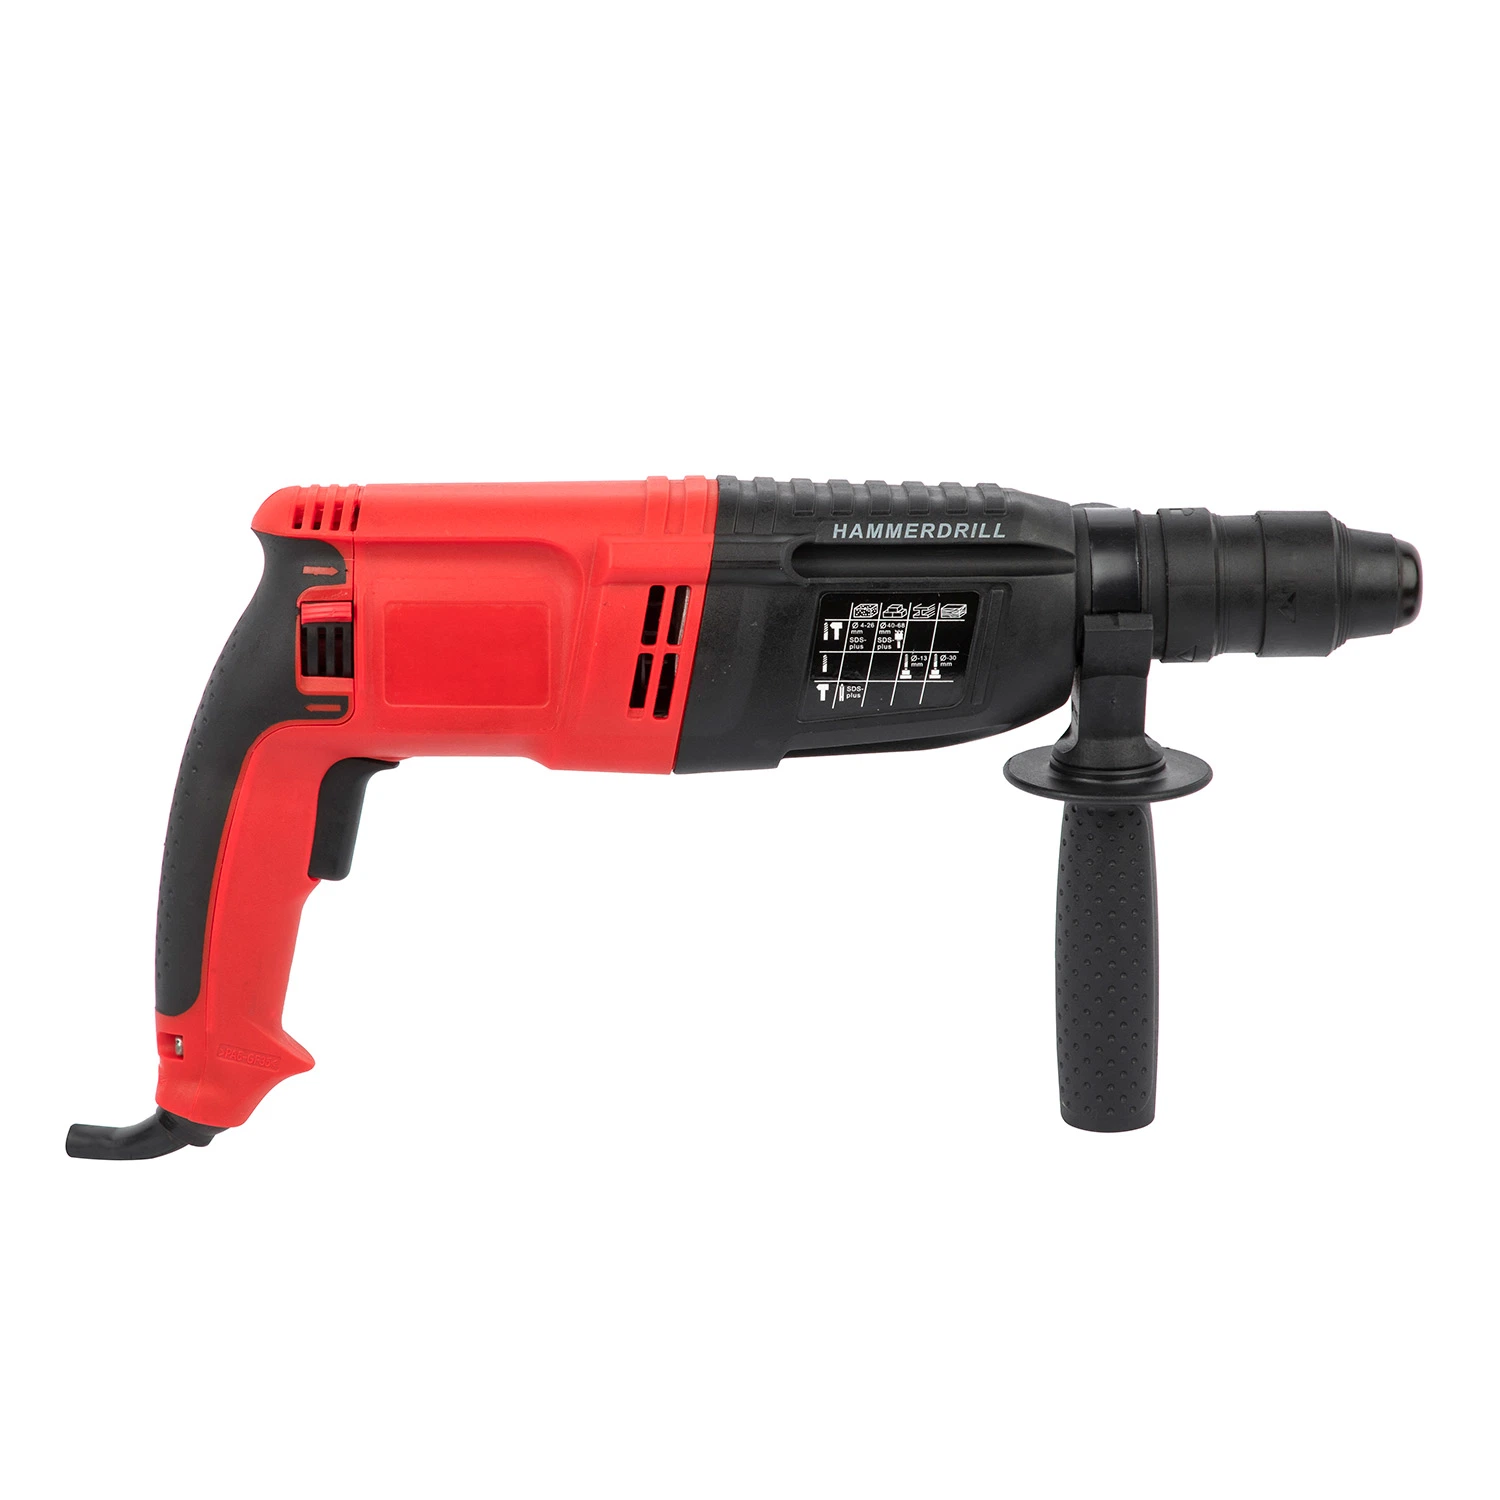 Most Popular Quick Changeable Chuck 800W 26dfr Rotary Hammer